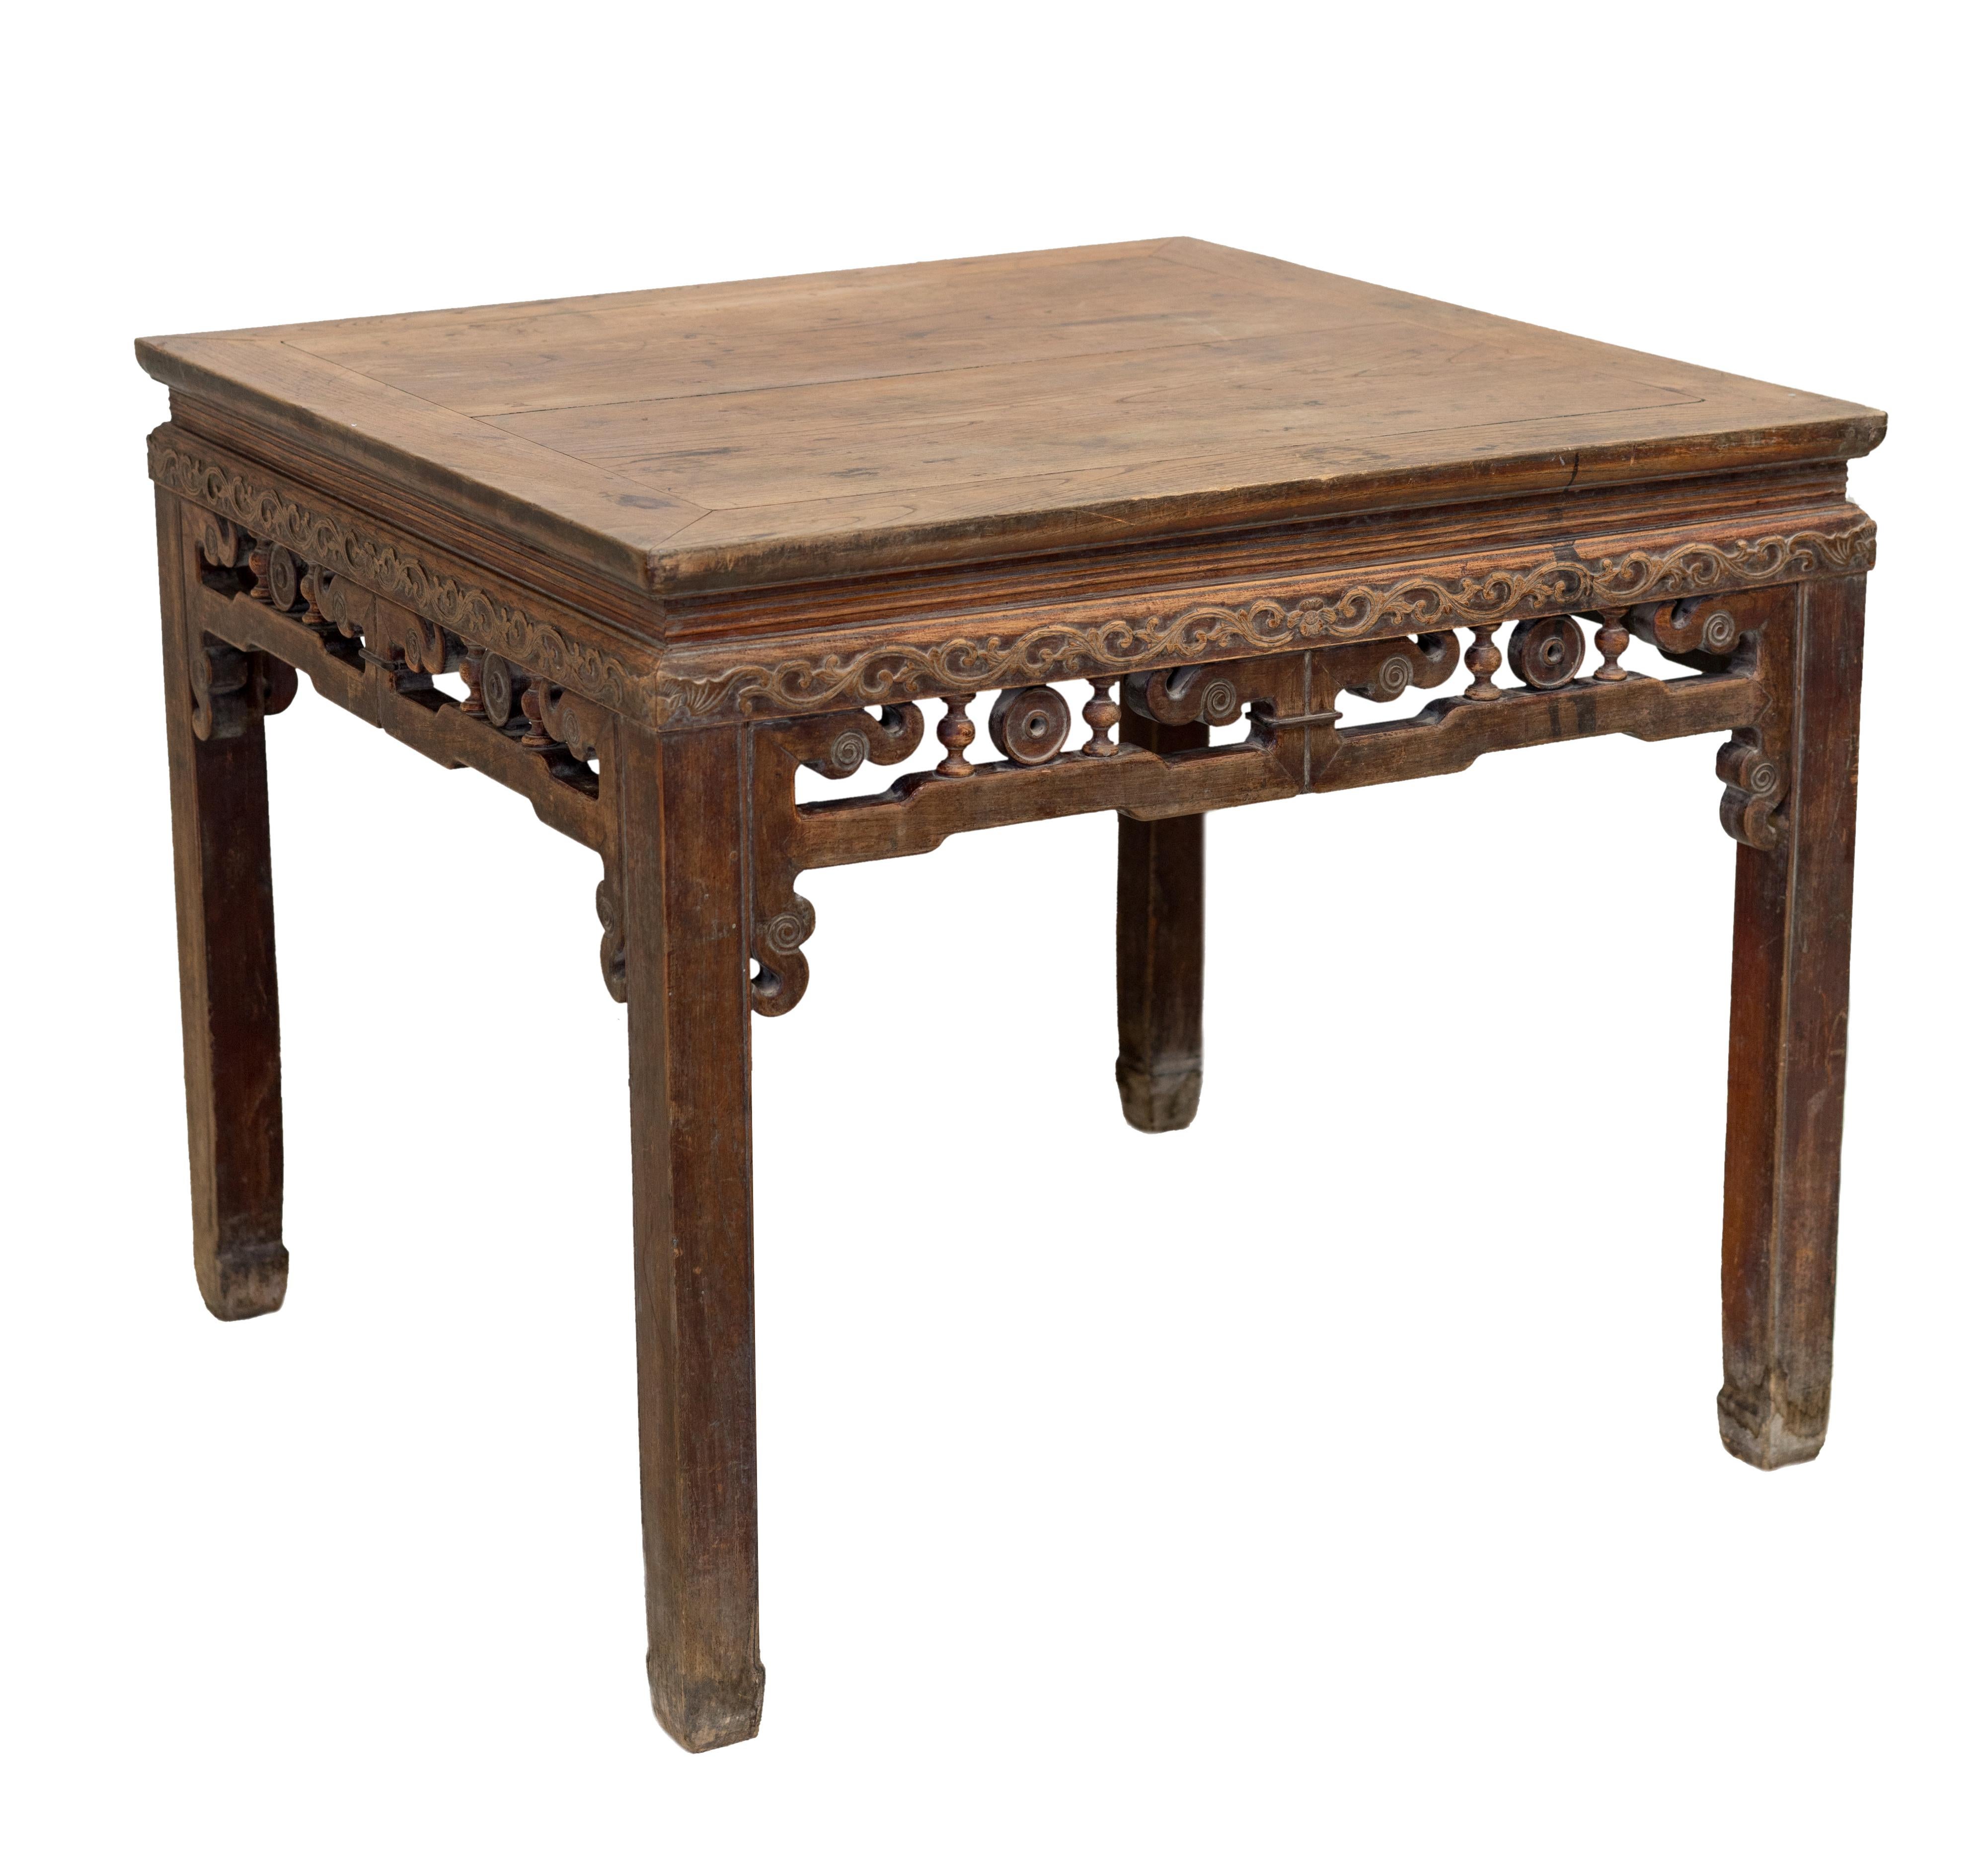 An early 20th century Jumu square waisted table from Zhejiang province, China. The tabletop consists of two panels joined in the middle. It has carvings of floral and vine motifs around the four sides and carvings of a bat at every corner. The